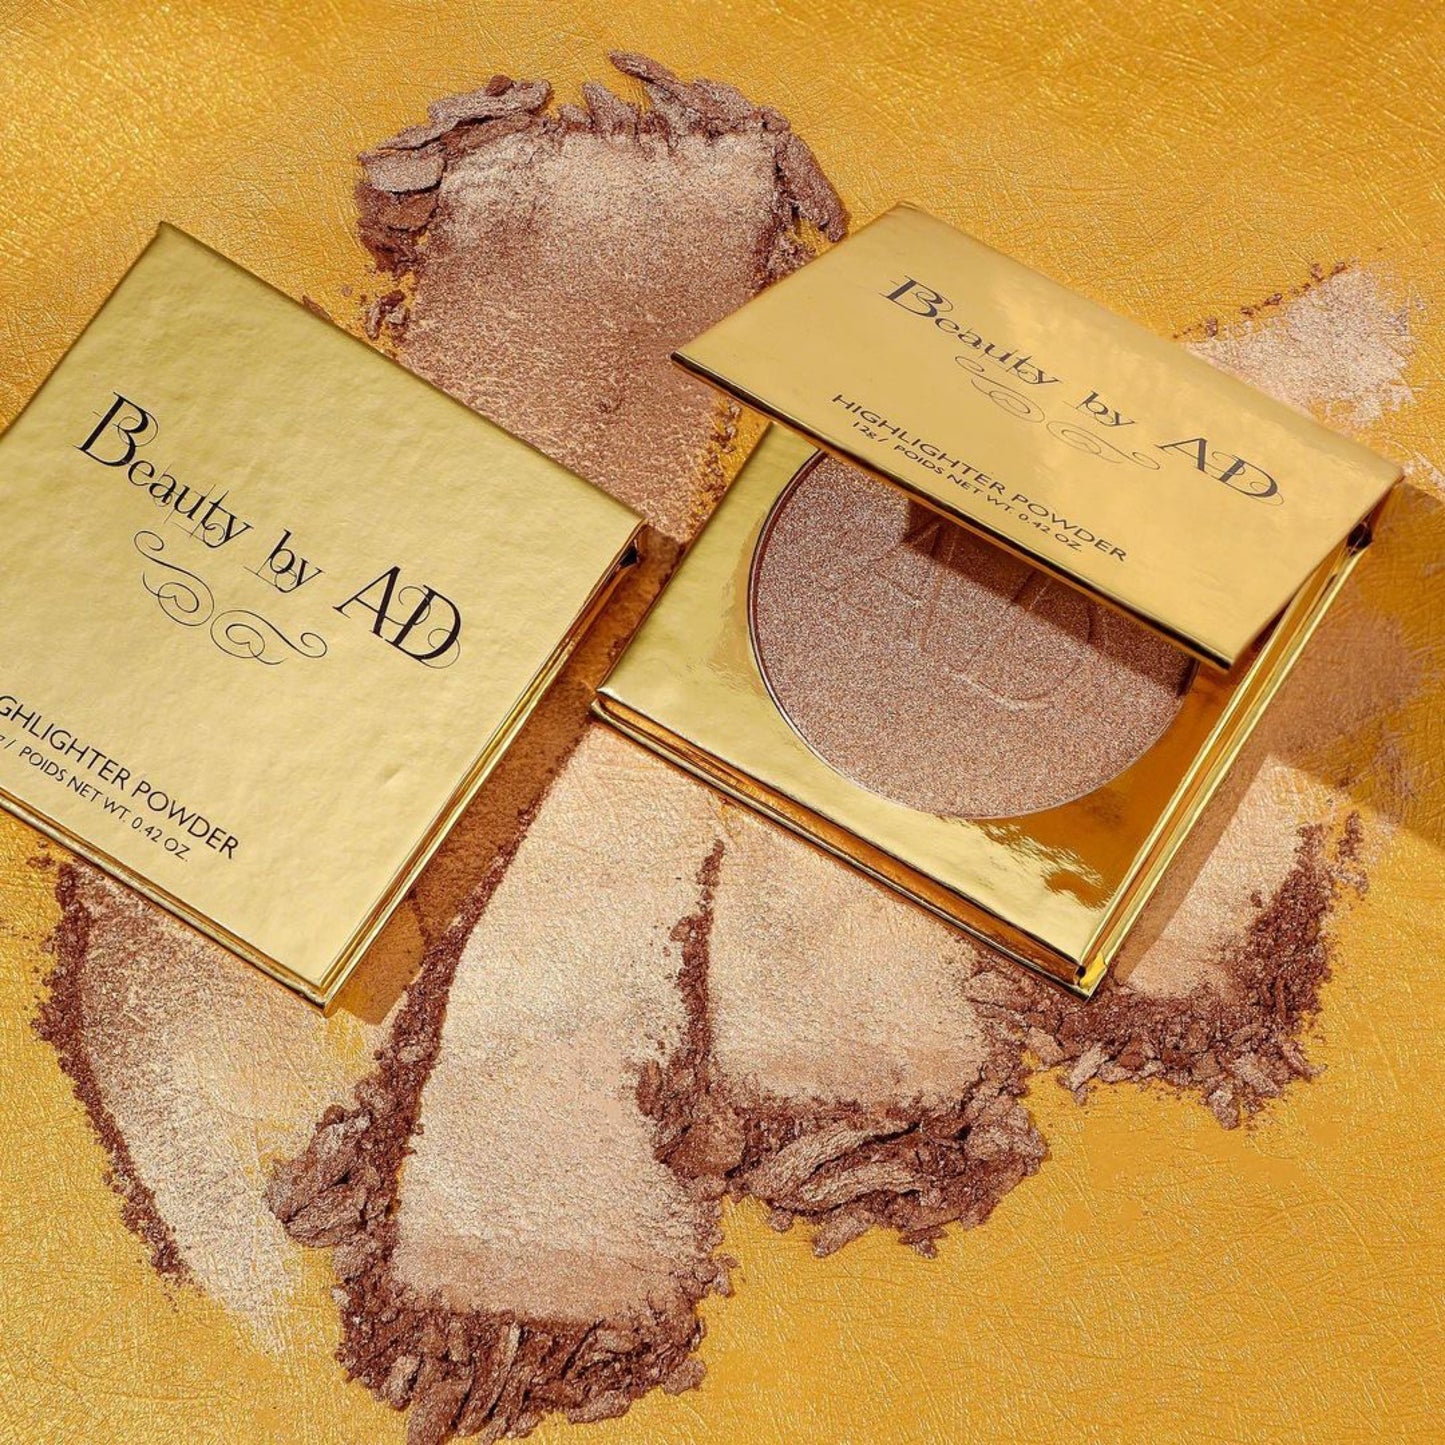 Beauty By AD Highlighter Powder